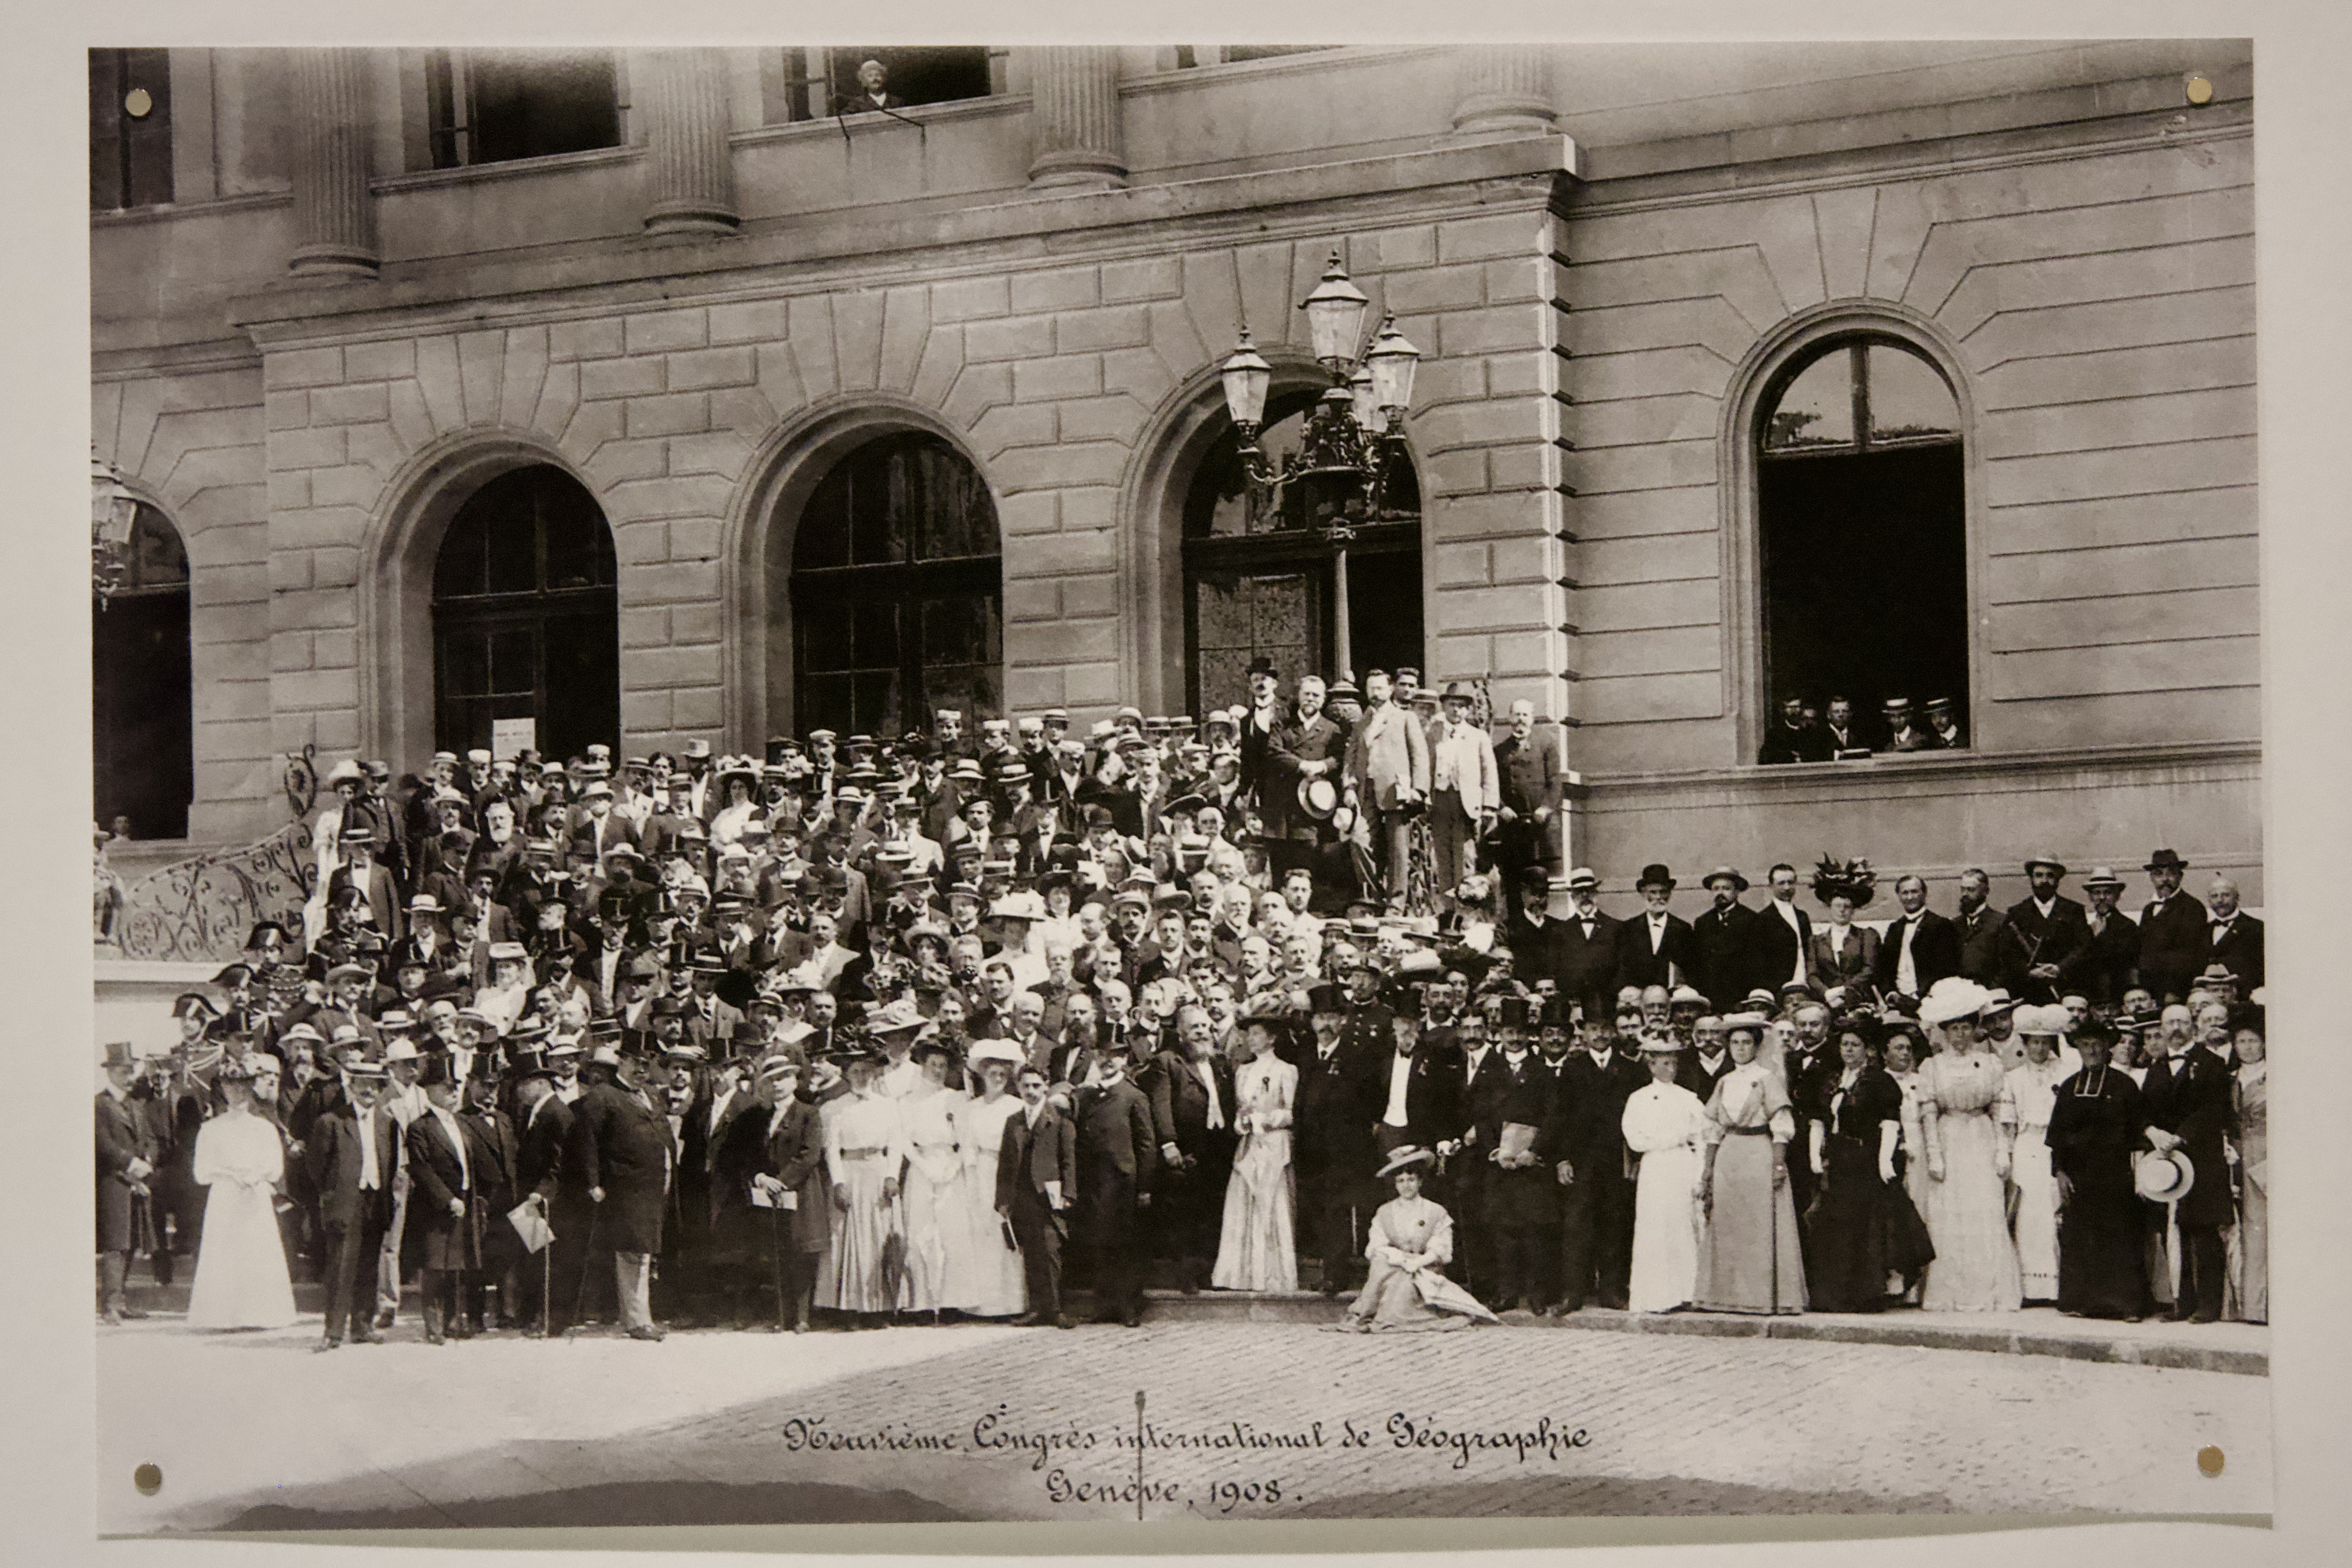 With the best intentions on display: participants of the 9th International Congress of Geography photographed in Geneva, July 1908.